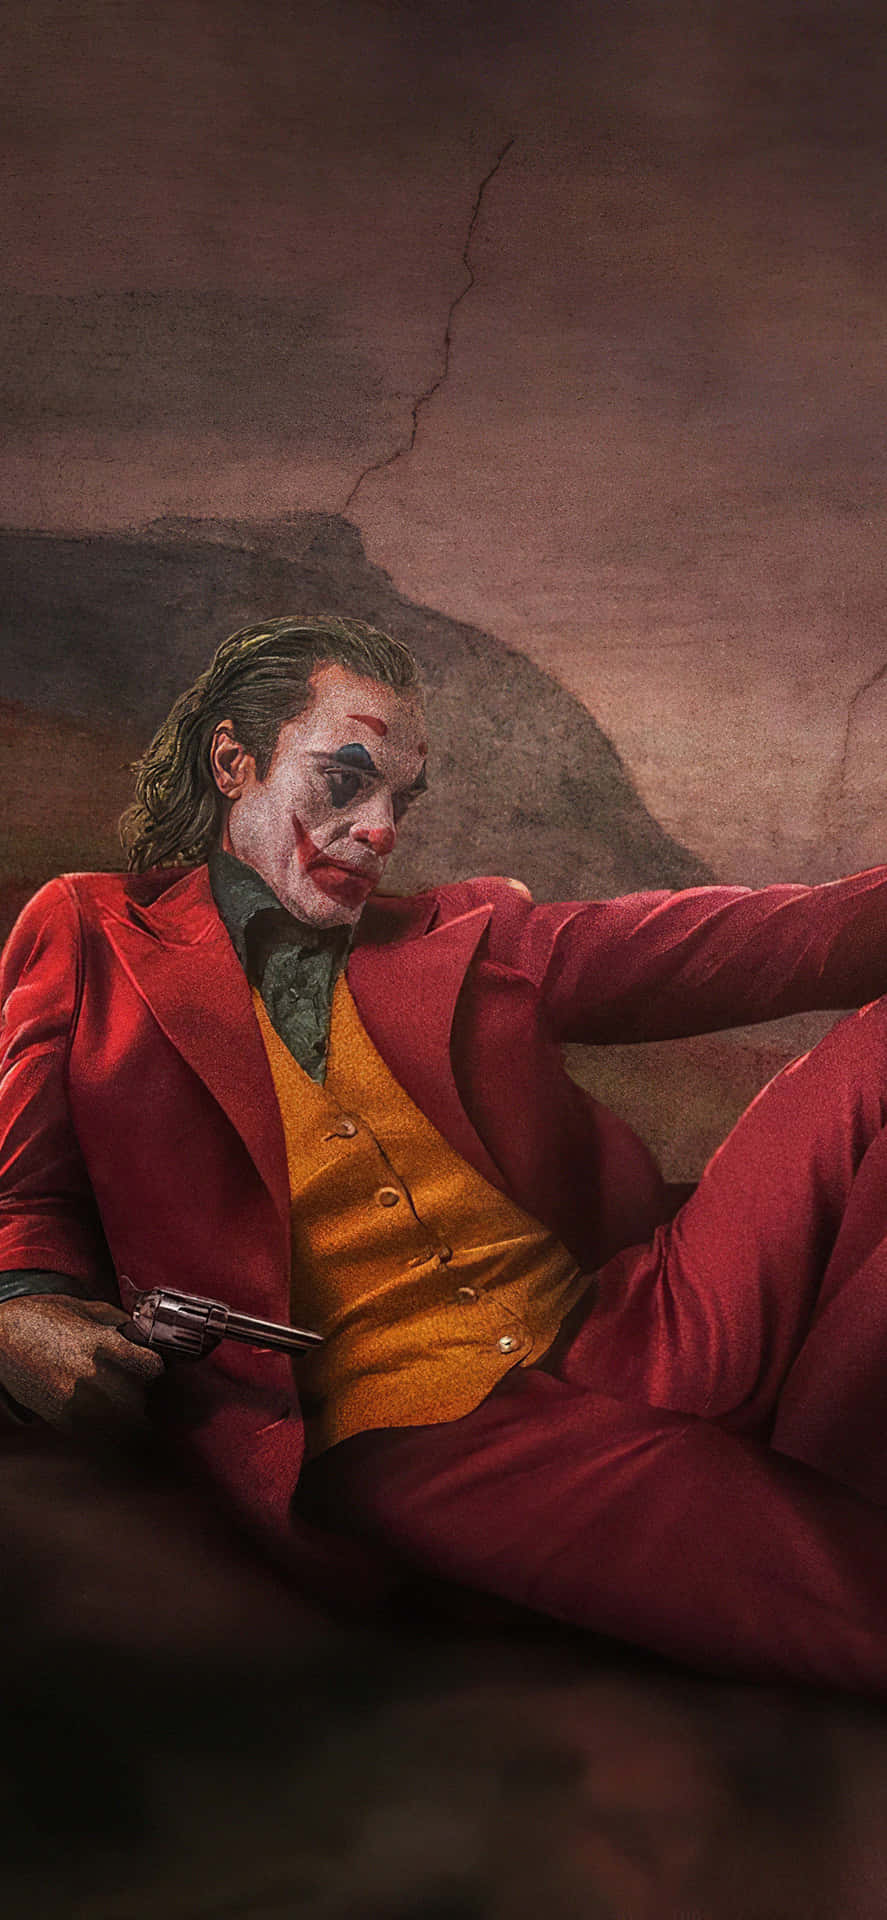 •  A mysterious and whimsical portrayal of the iconic Joker. Wallpaper